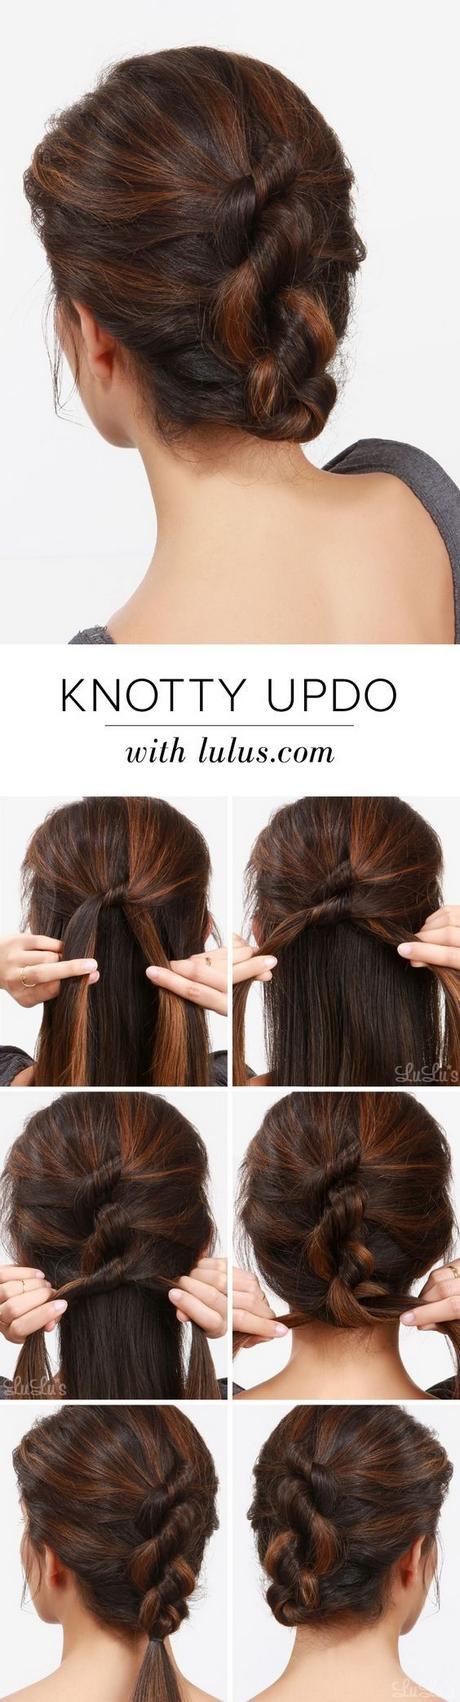 Easy professional updos for long hair easy-professional-updos-for-long-hair-02_17